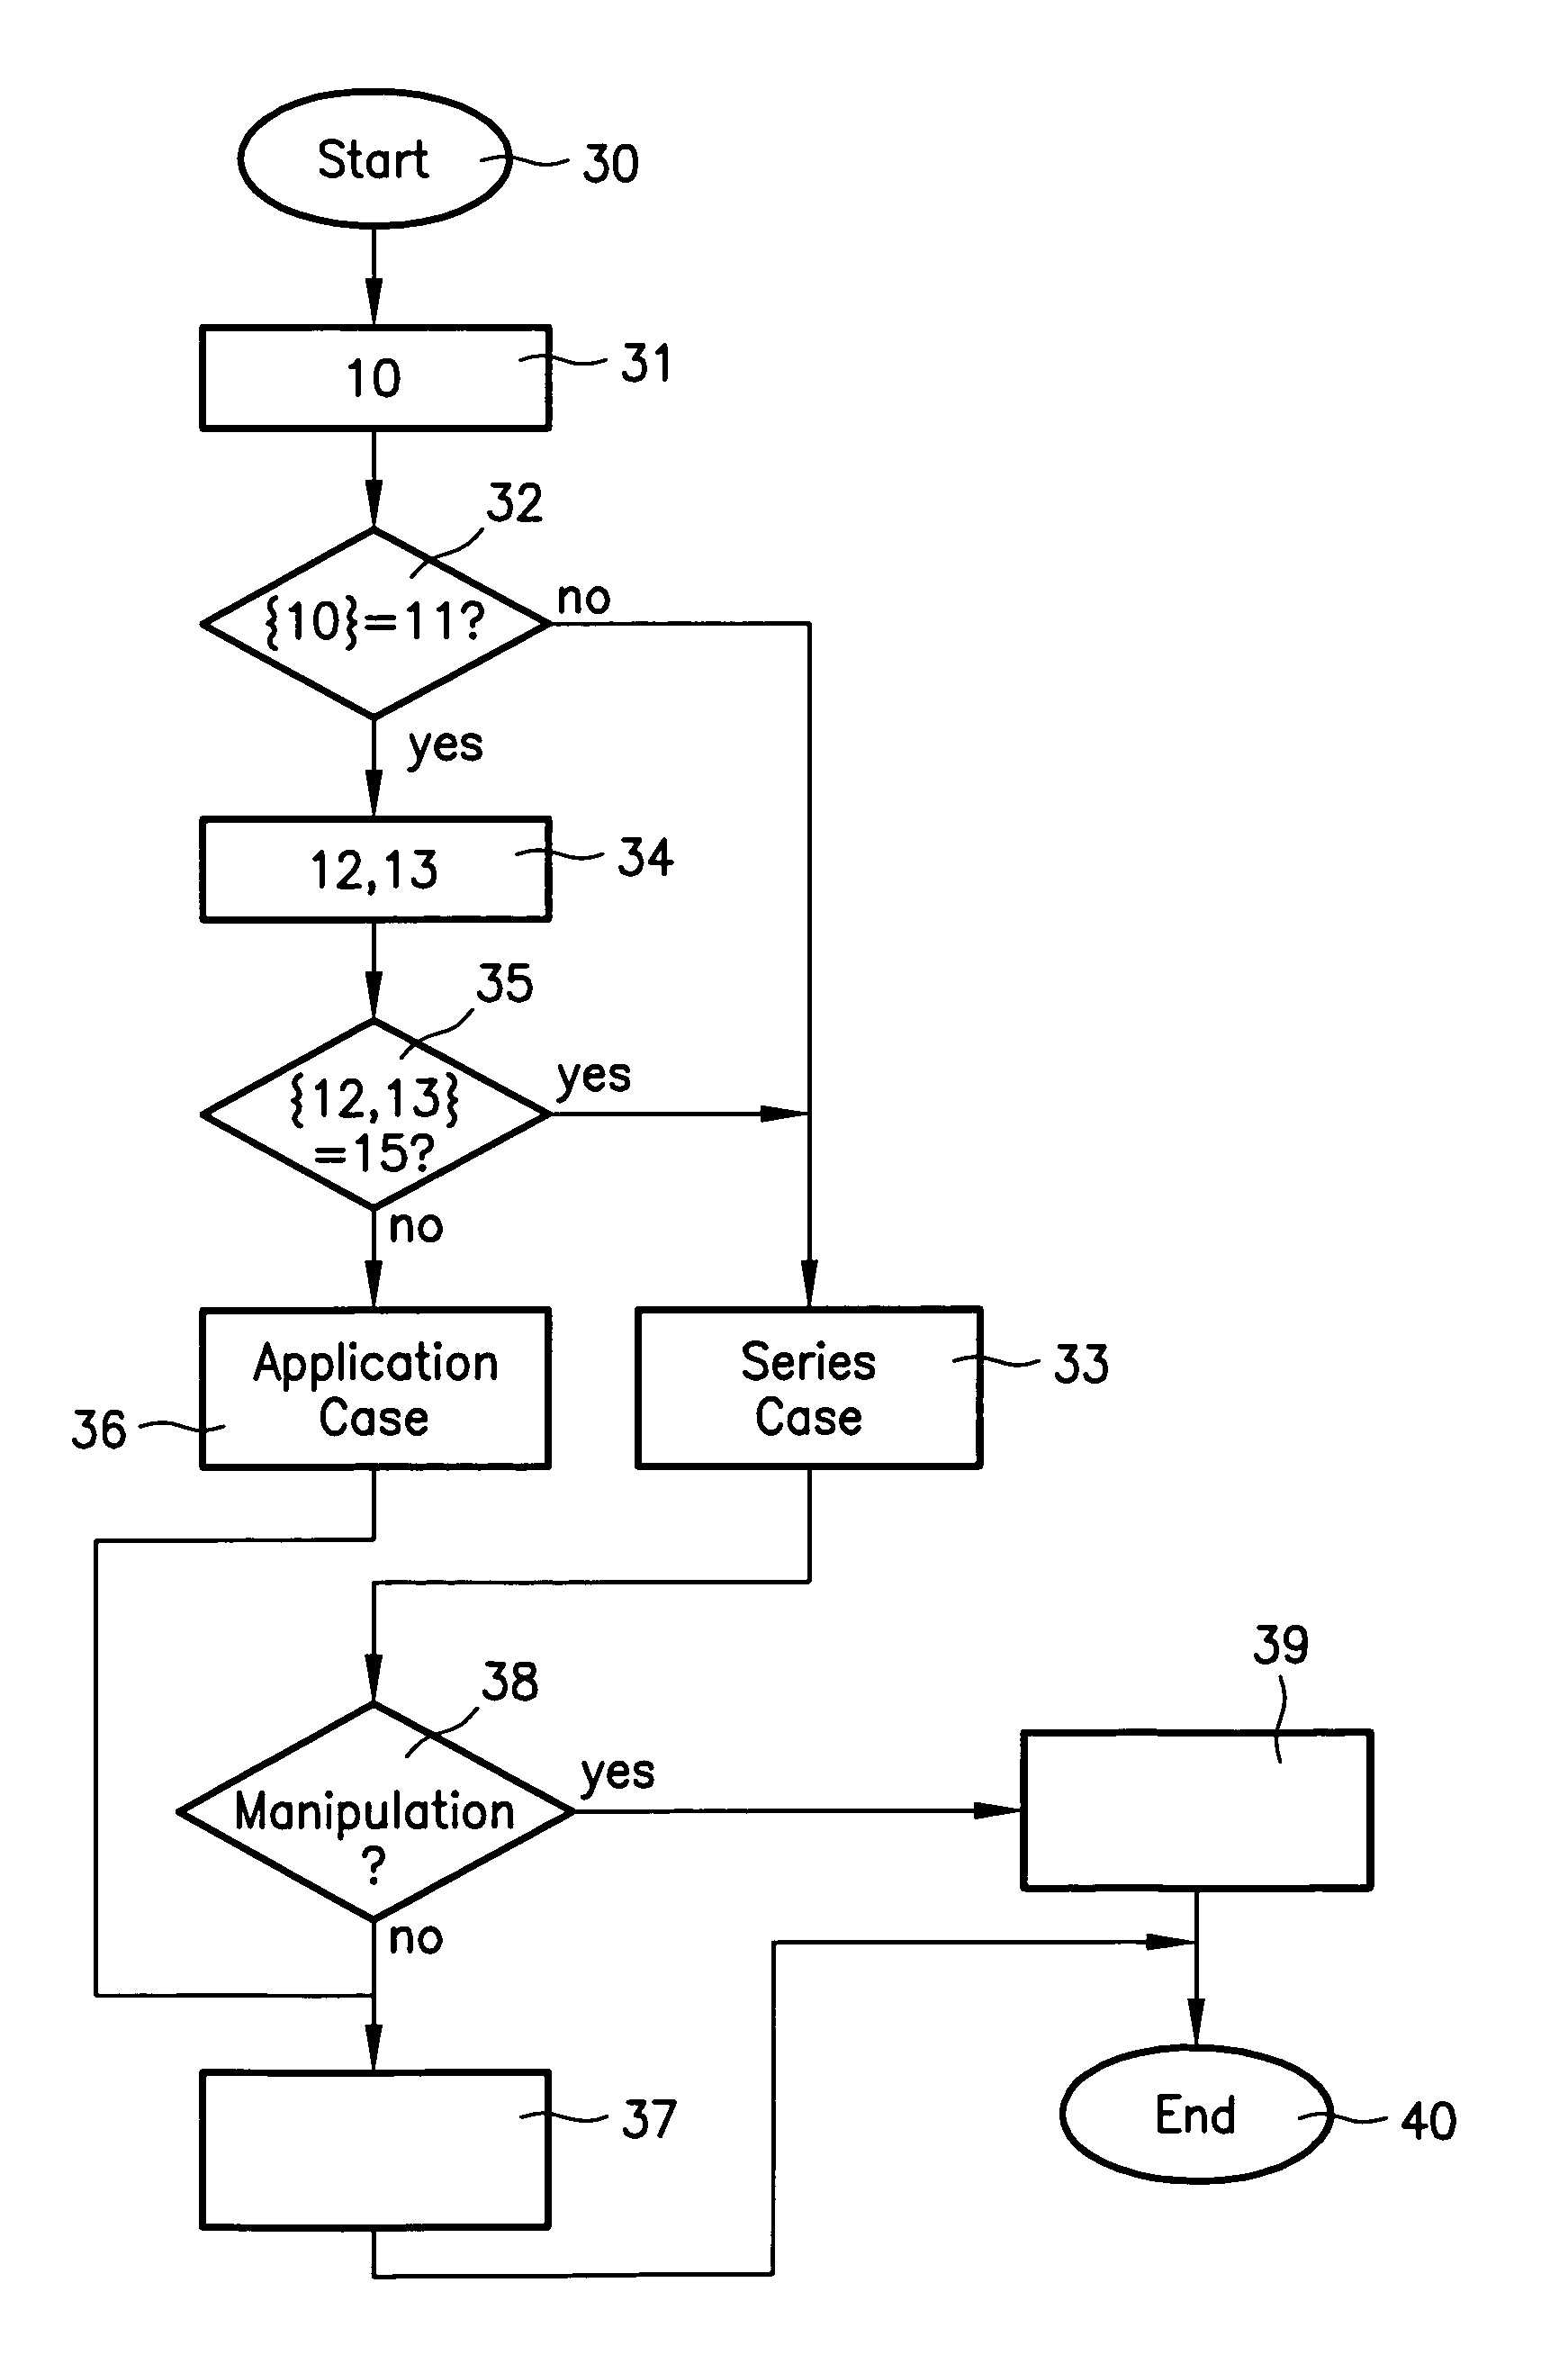 Method of operating a microcomputer system